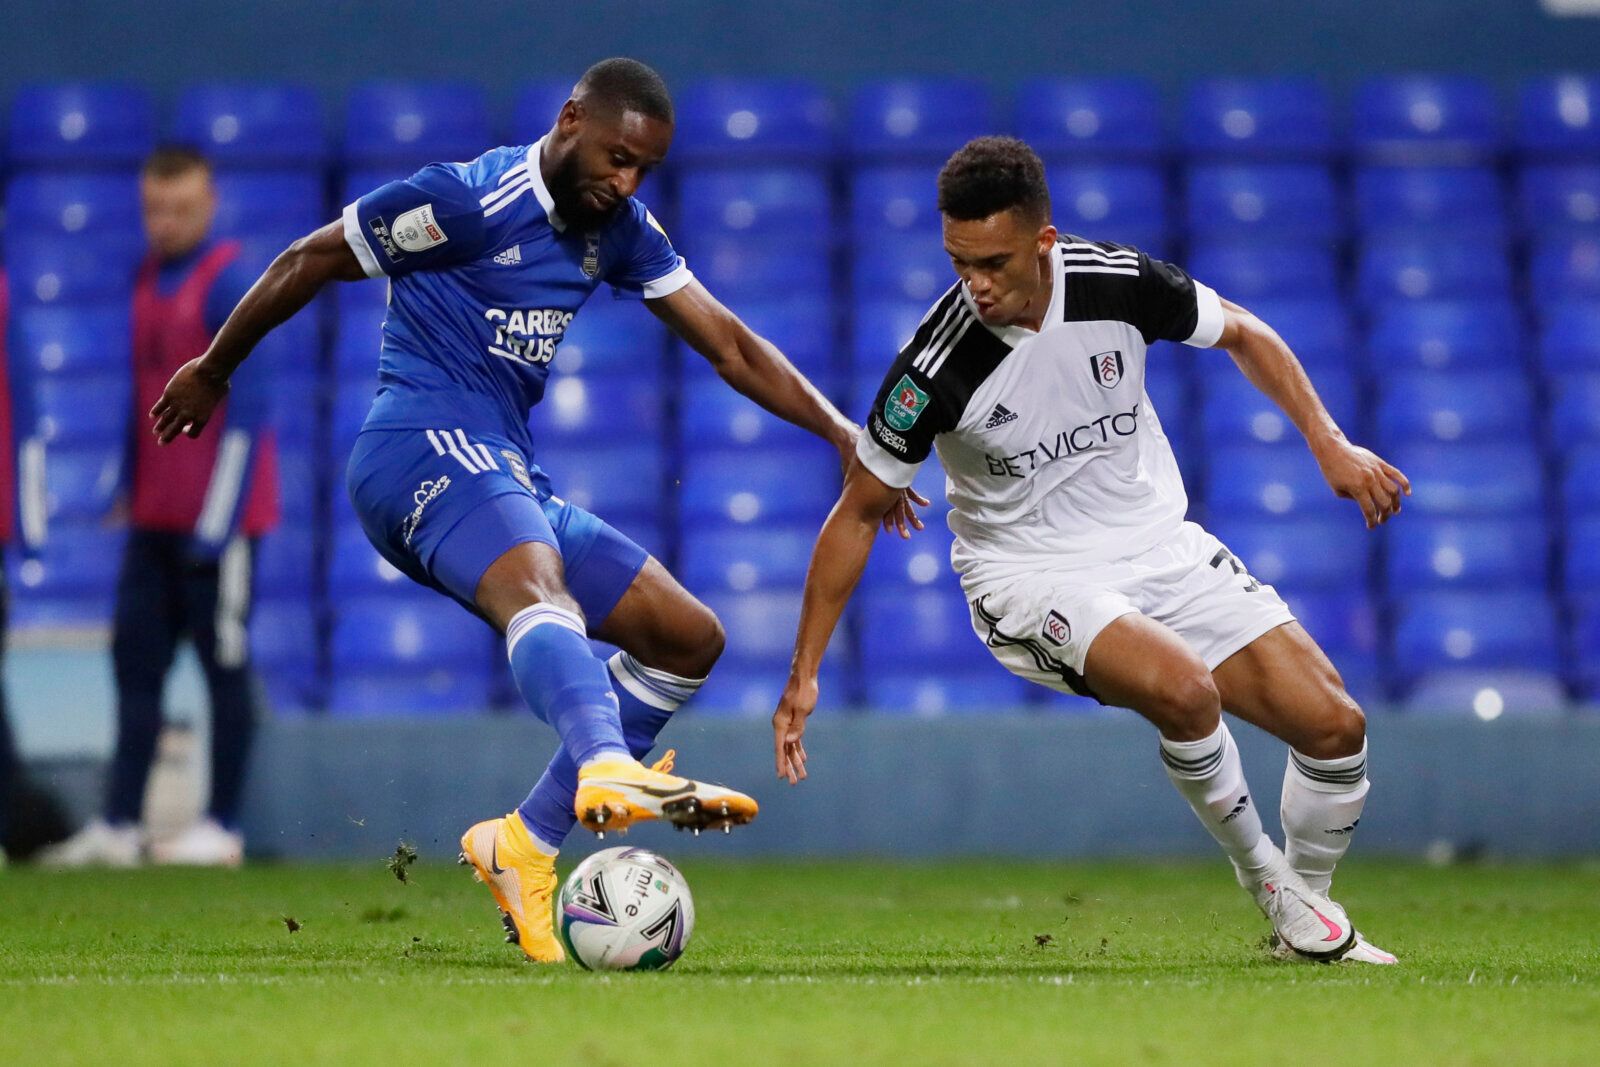 Soccer Football - Carabao Cup Second Round - Ipswich Town v Fulham - Portman Road, Ipswich, Britain - September 16, 2020. Fulham's Antonee Robinson in action with Ipswich Town's Janoi Donacien Pool via REUTERS/Kirsty Wigglesworth EDITORIAL USE ONLY. No use with unauthorized audio, video, data, fixture lists, club/league logos or 'live' services. Online in-match use limited to 75 images, no video emulation. No use in betting, games or single club/league/player publications.  Please contact your a